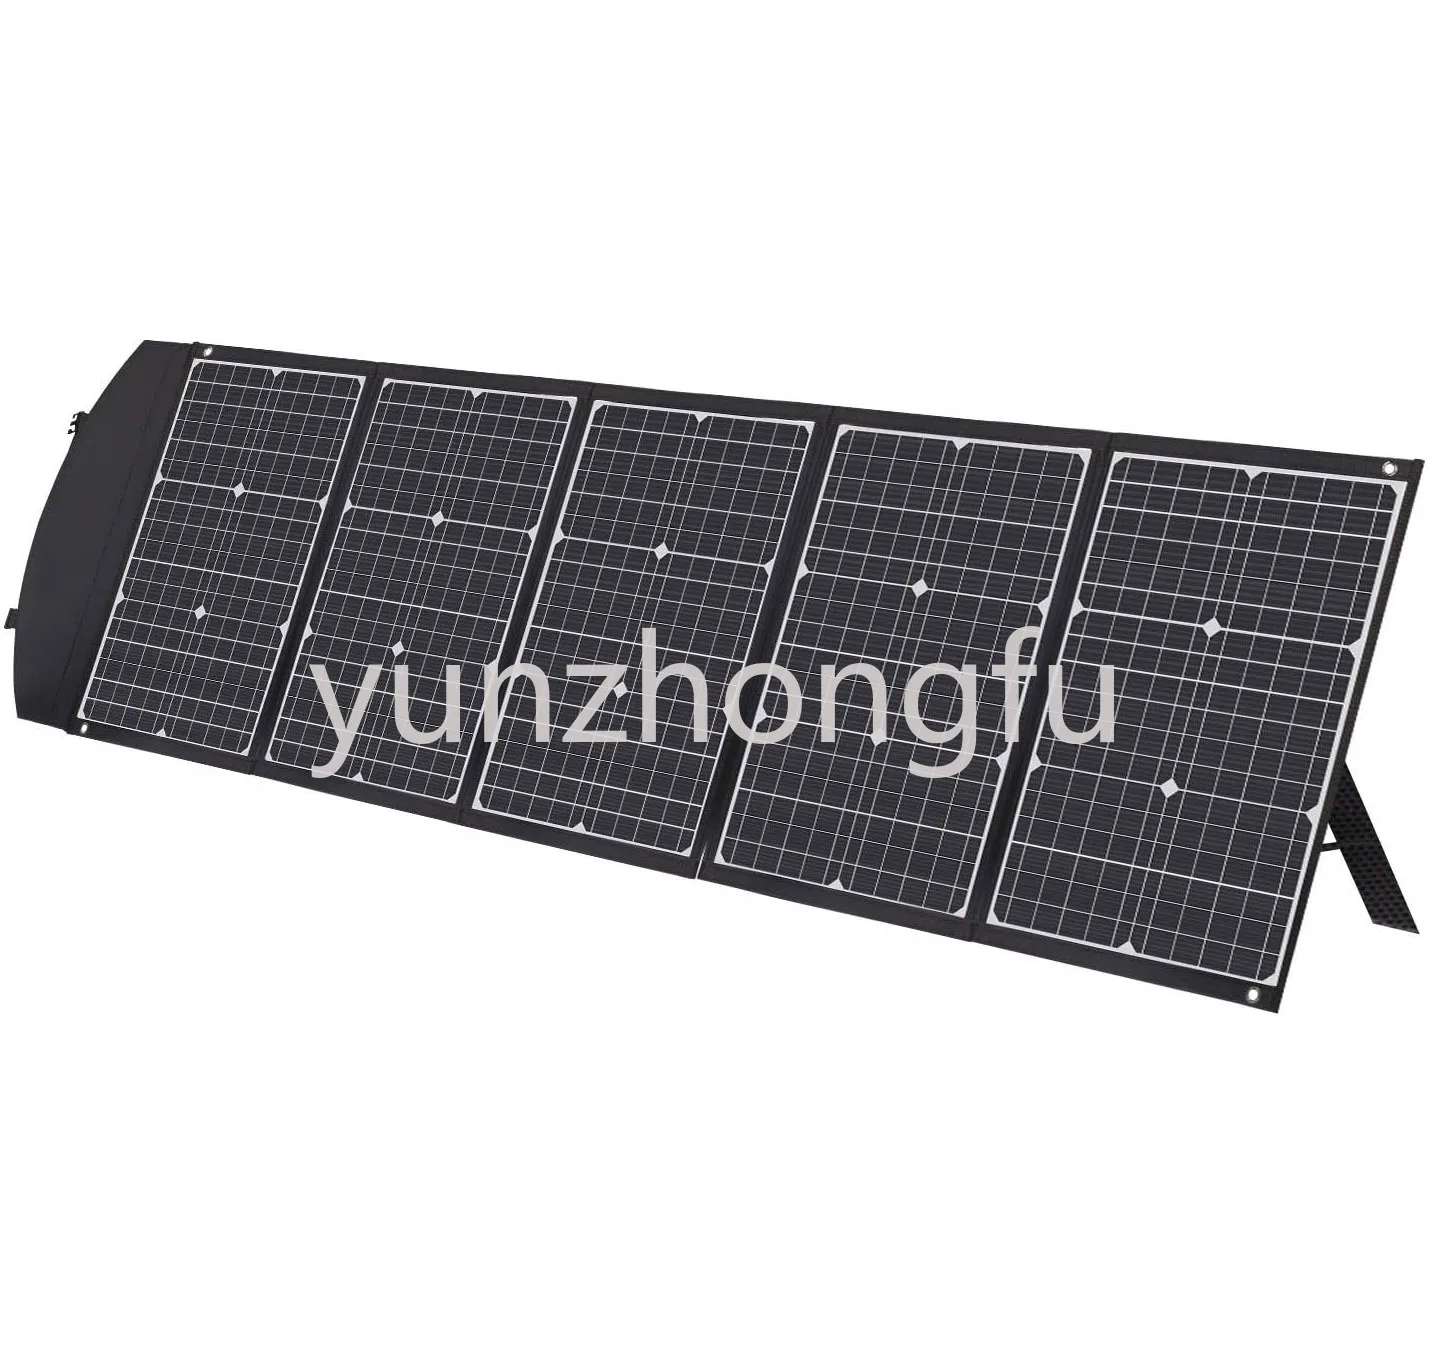 150W Solar Panel Kit Portable Solar Charger with Kickstands 